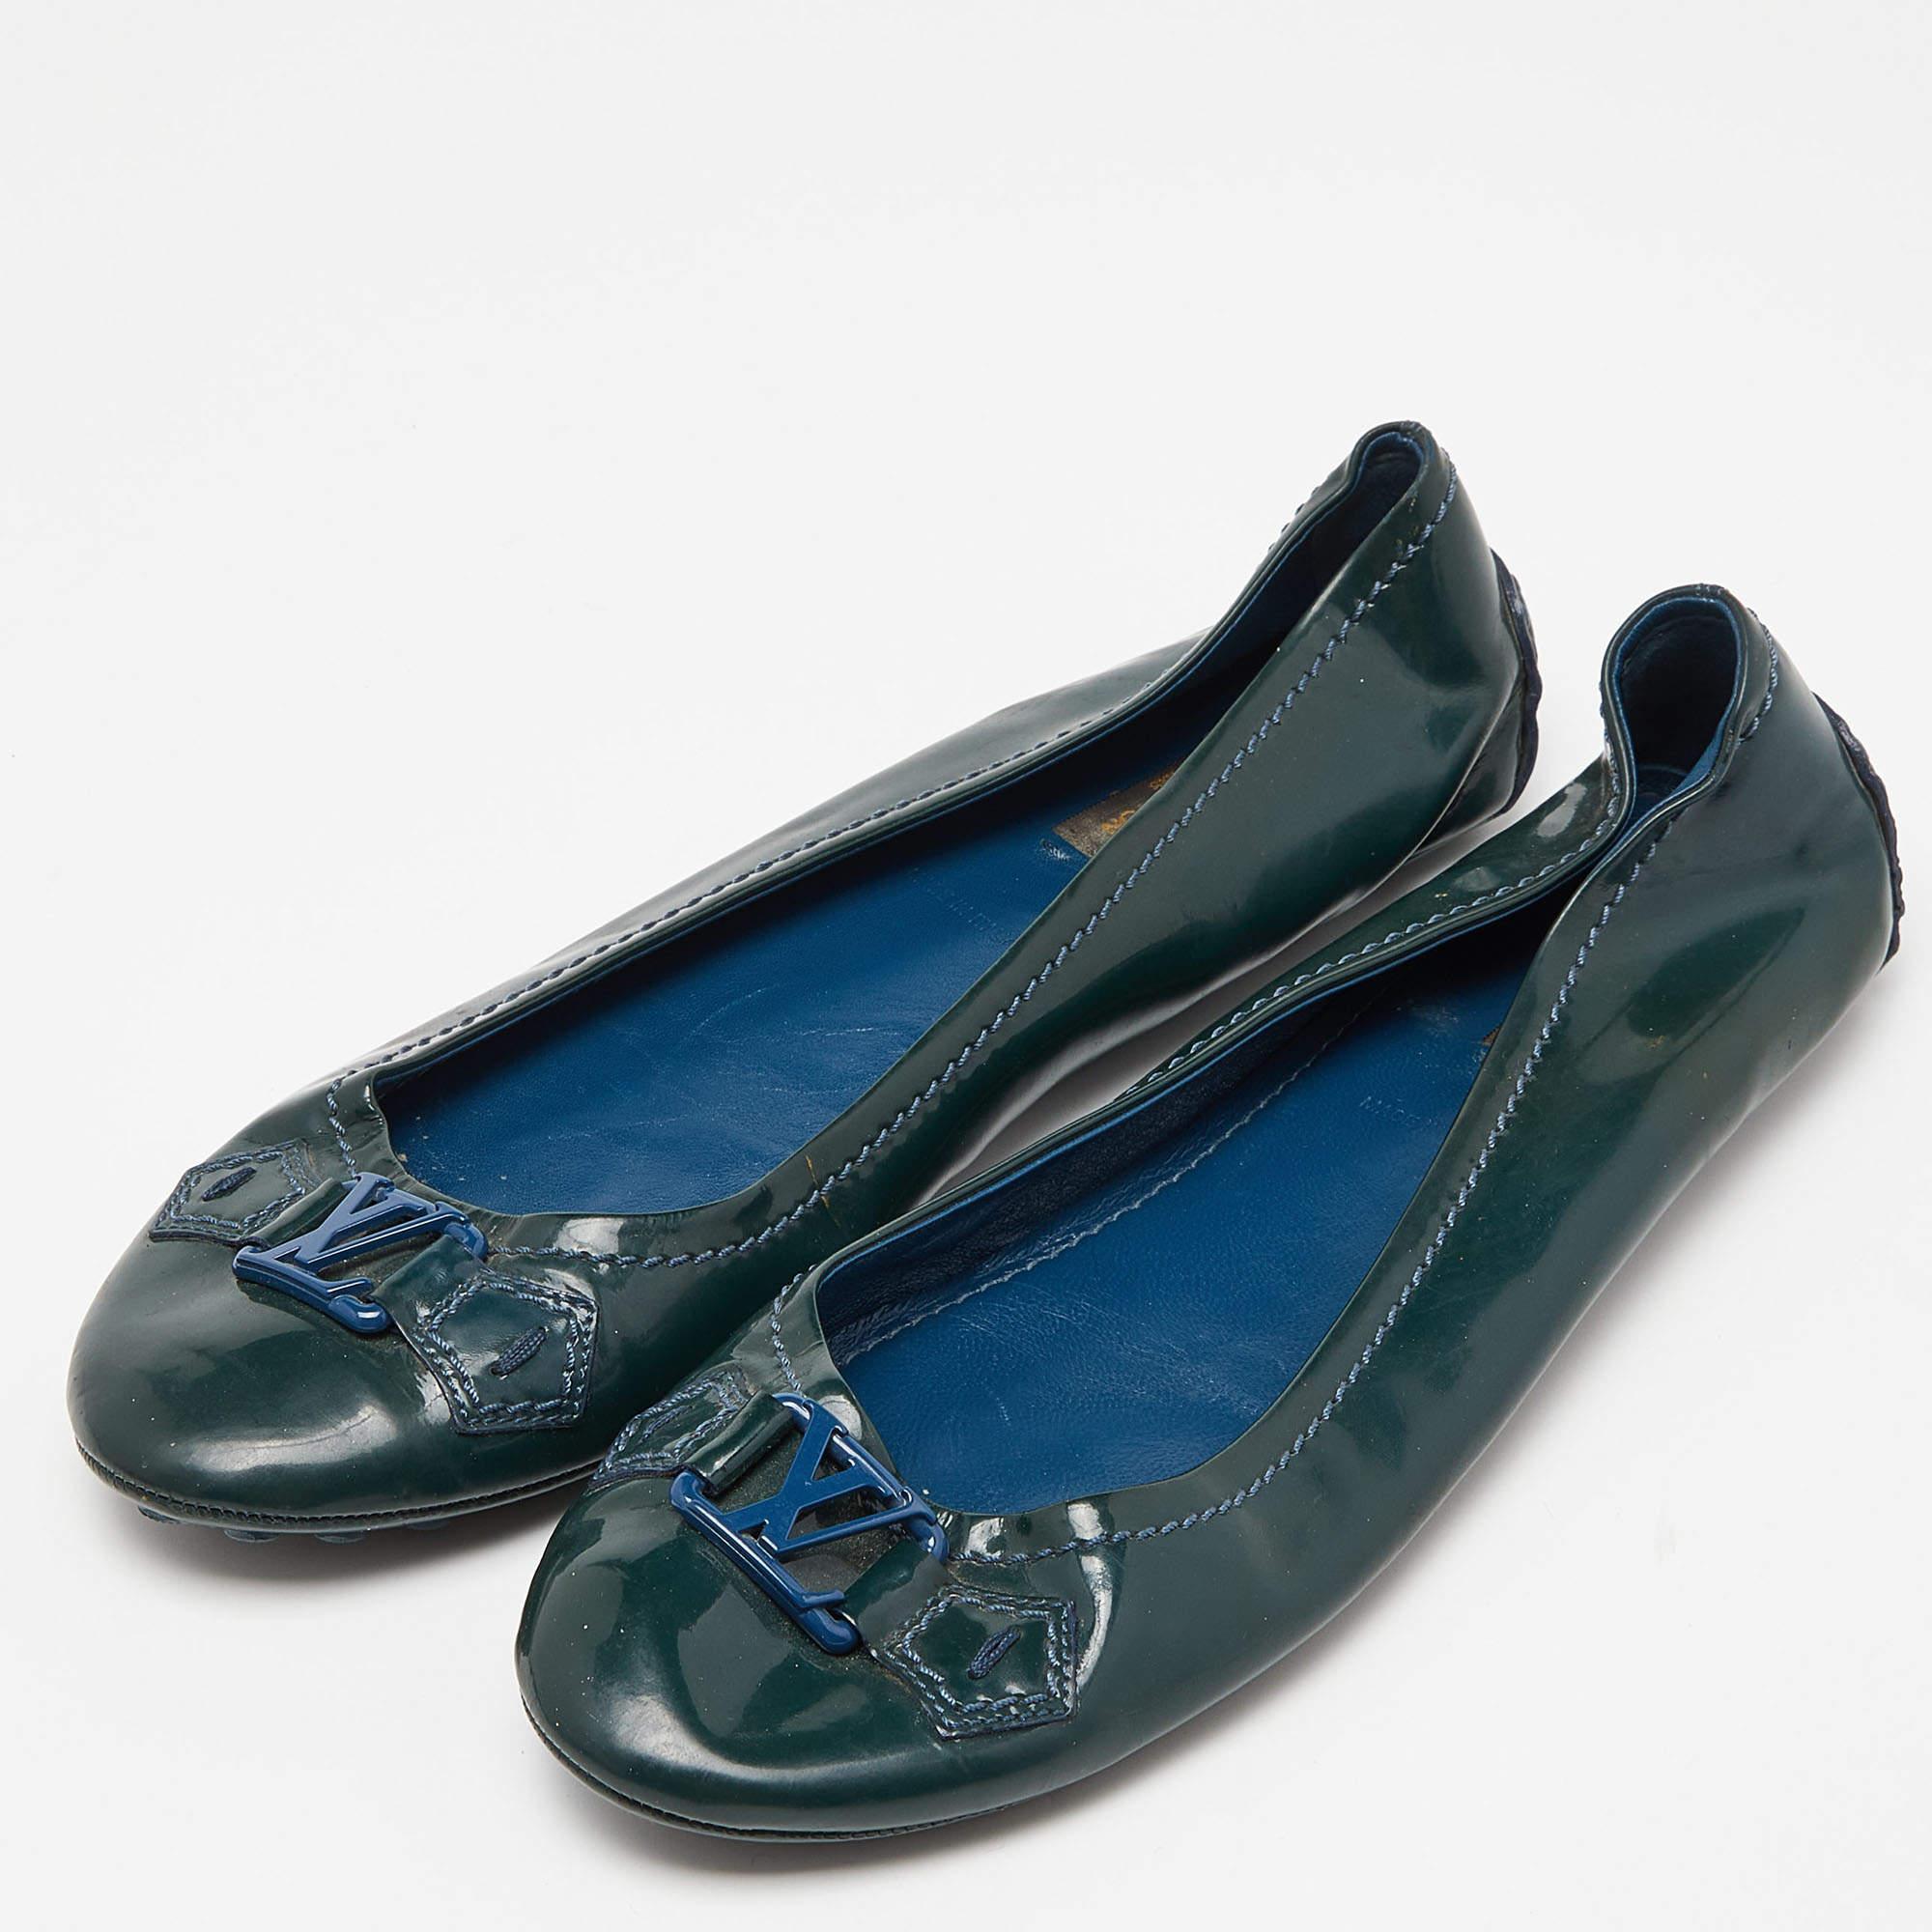 Louis Vuitton Dark Green Patent Leather Oxford Ballet Flats Size 39.5 For Sale 3